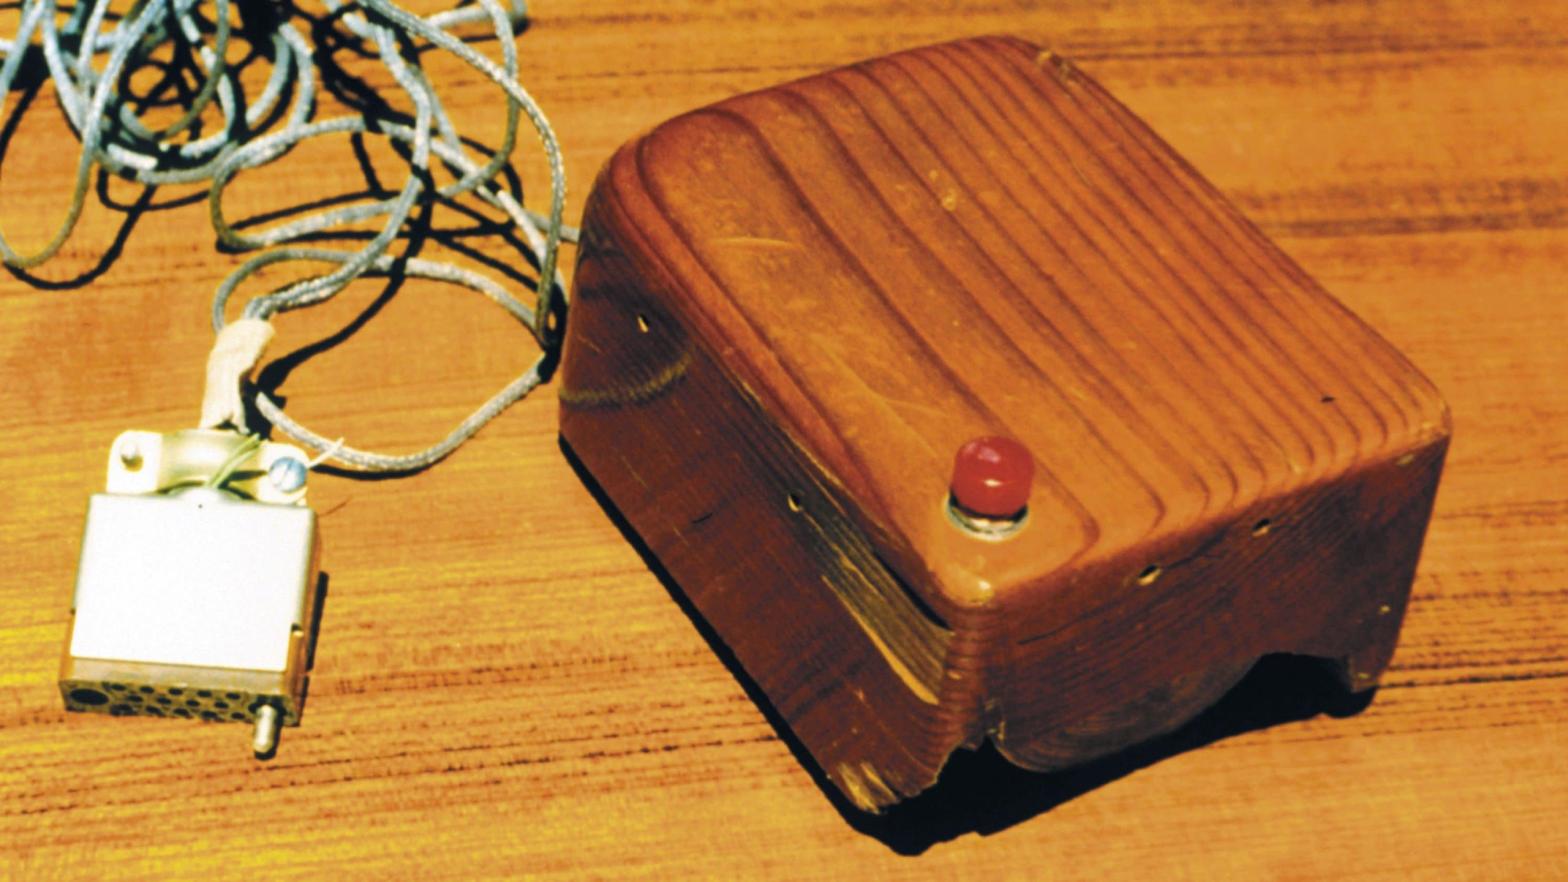 An early version of the computer mouse. (Photo: Getty Images Staff, Getty Images)